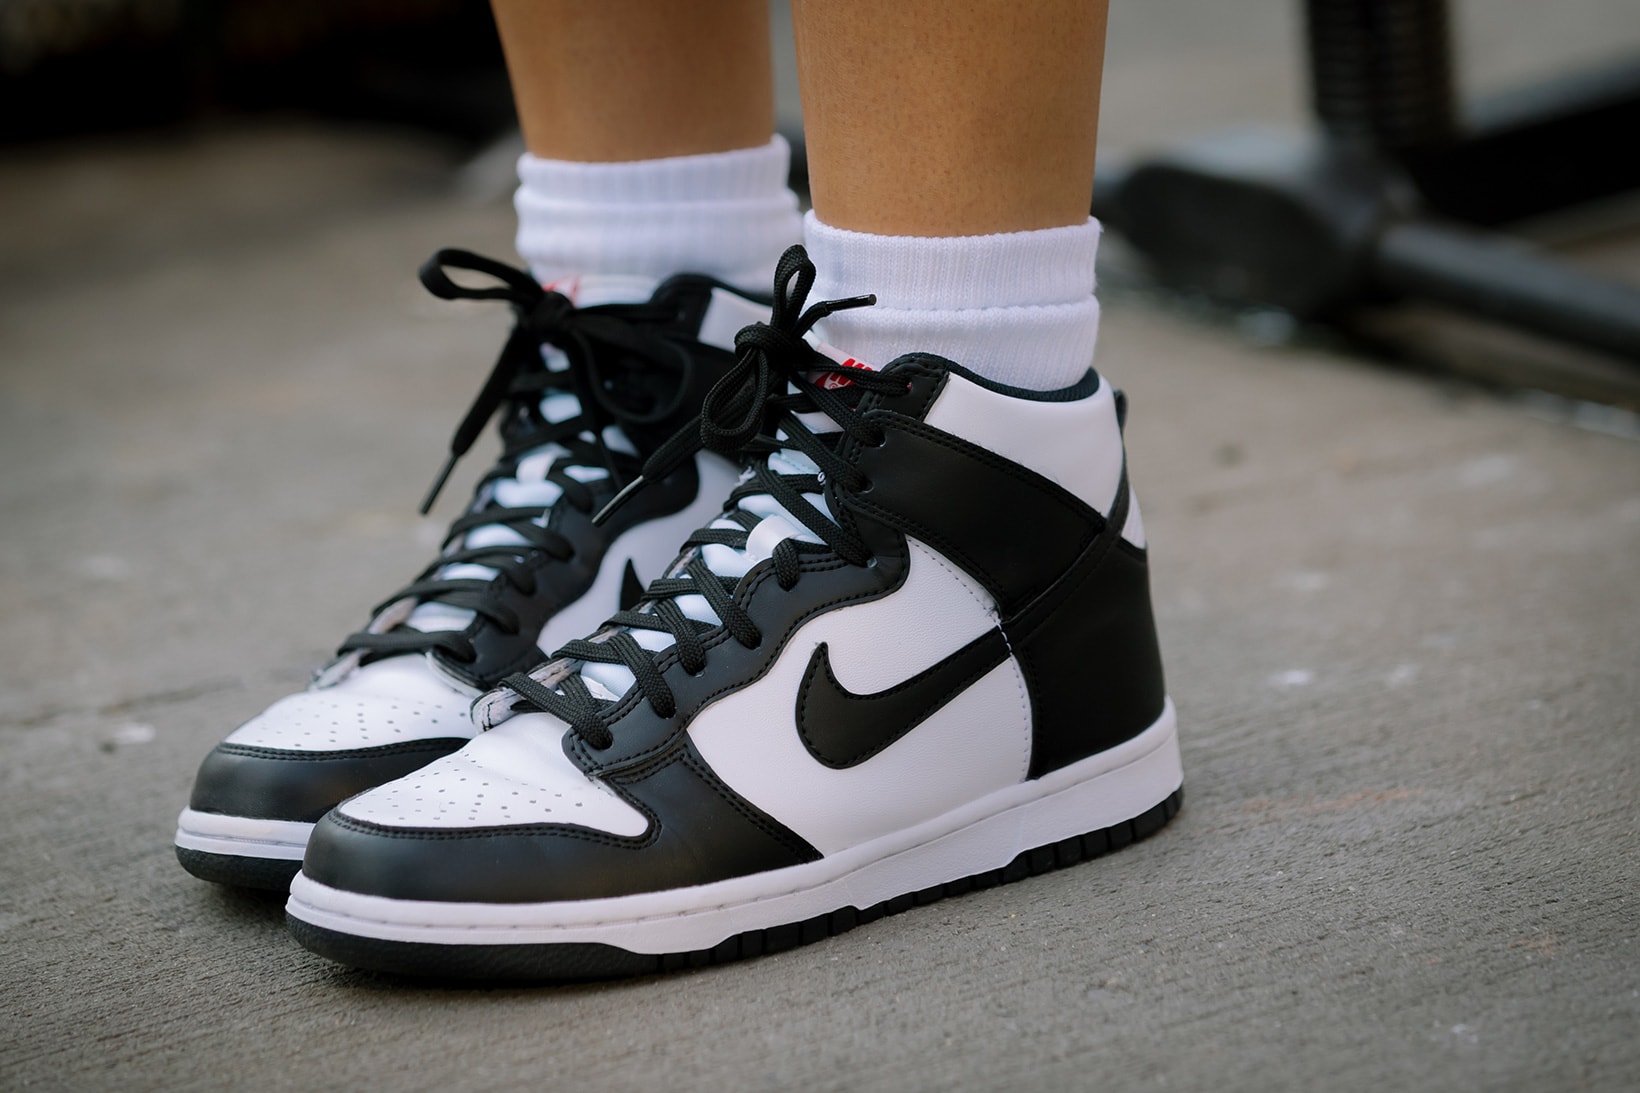 Nike Sneakers White Black Dunk High New York Fashion Week SS22 Best Street Style Trends Spring Summer 2022 Influencer